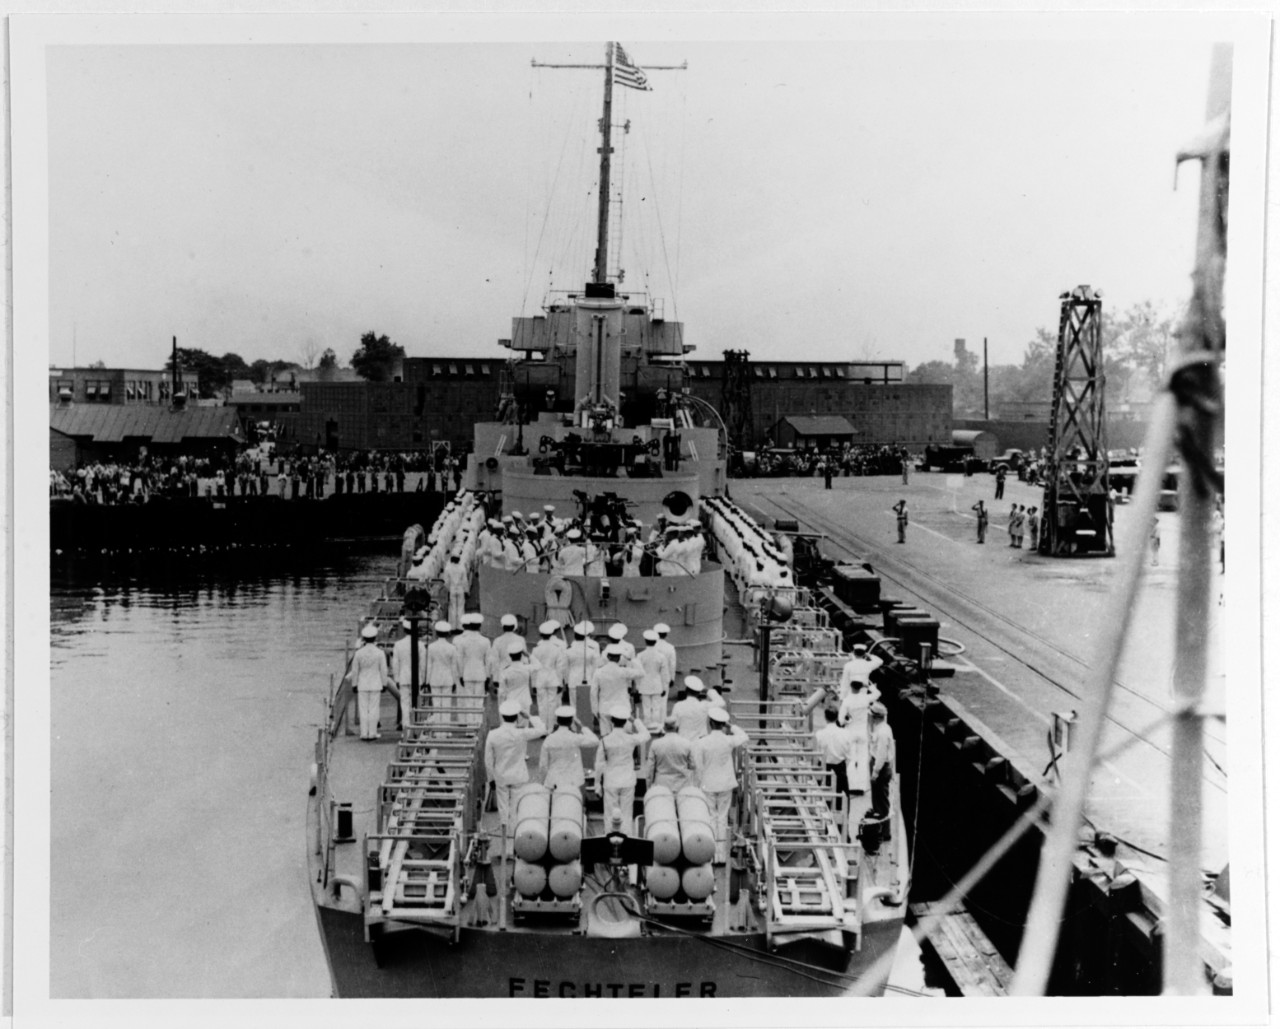 Fechteler’s commissioning ceremony at the Norfolk Navy Yard, 1 July 1943. (Naval History and Heritage Command Photograph NH 79827)